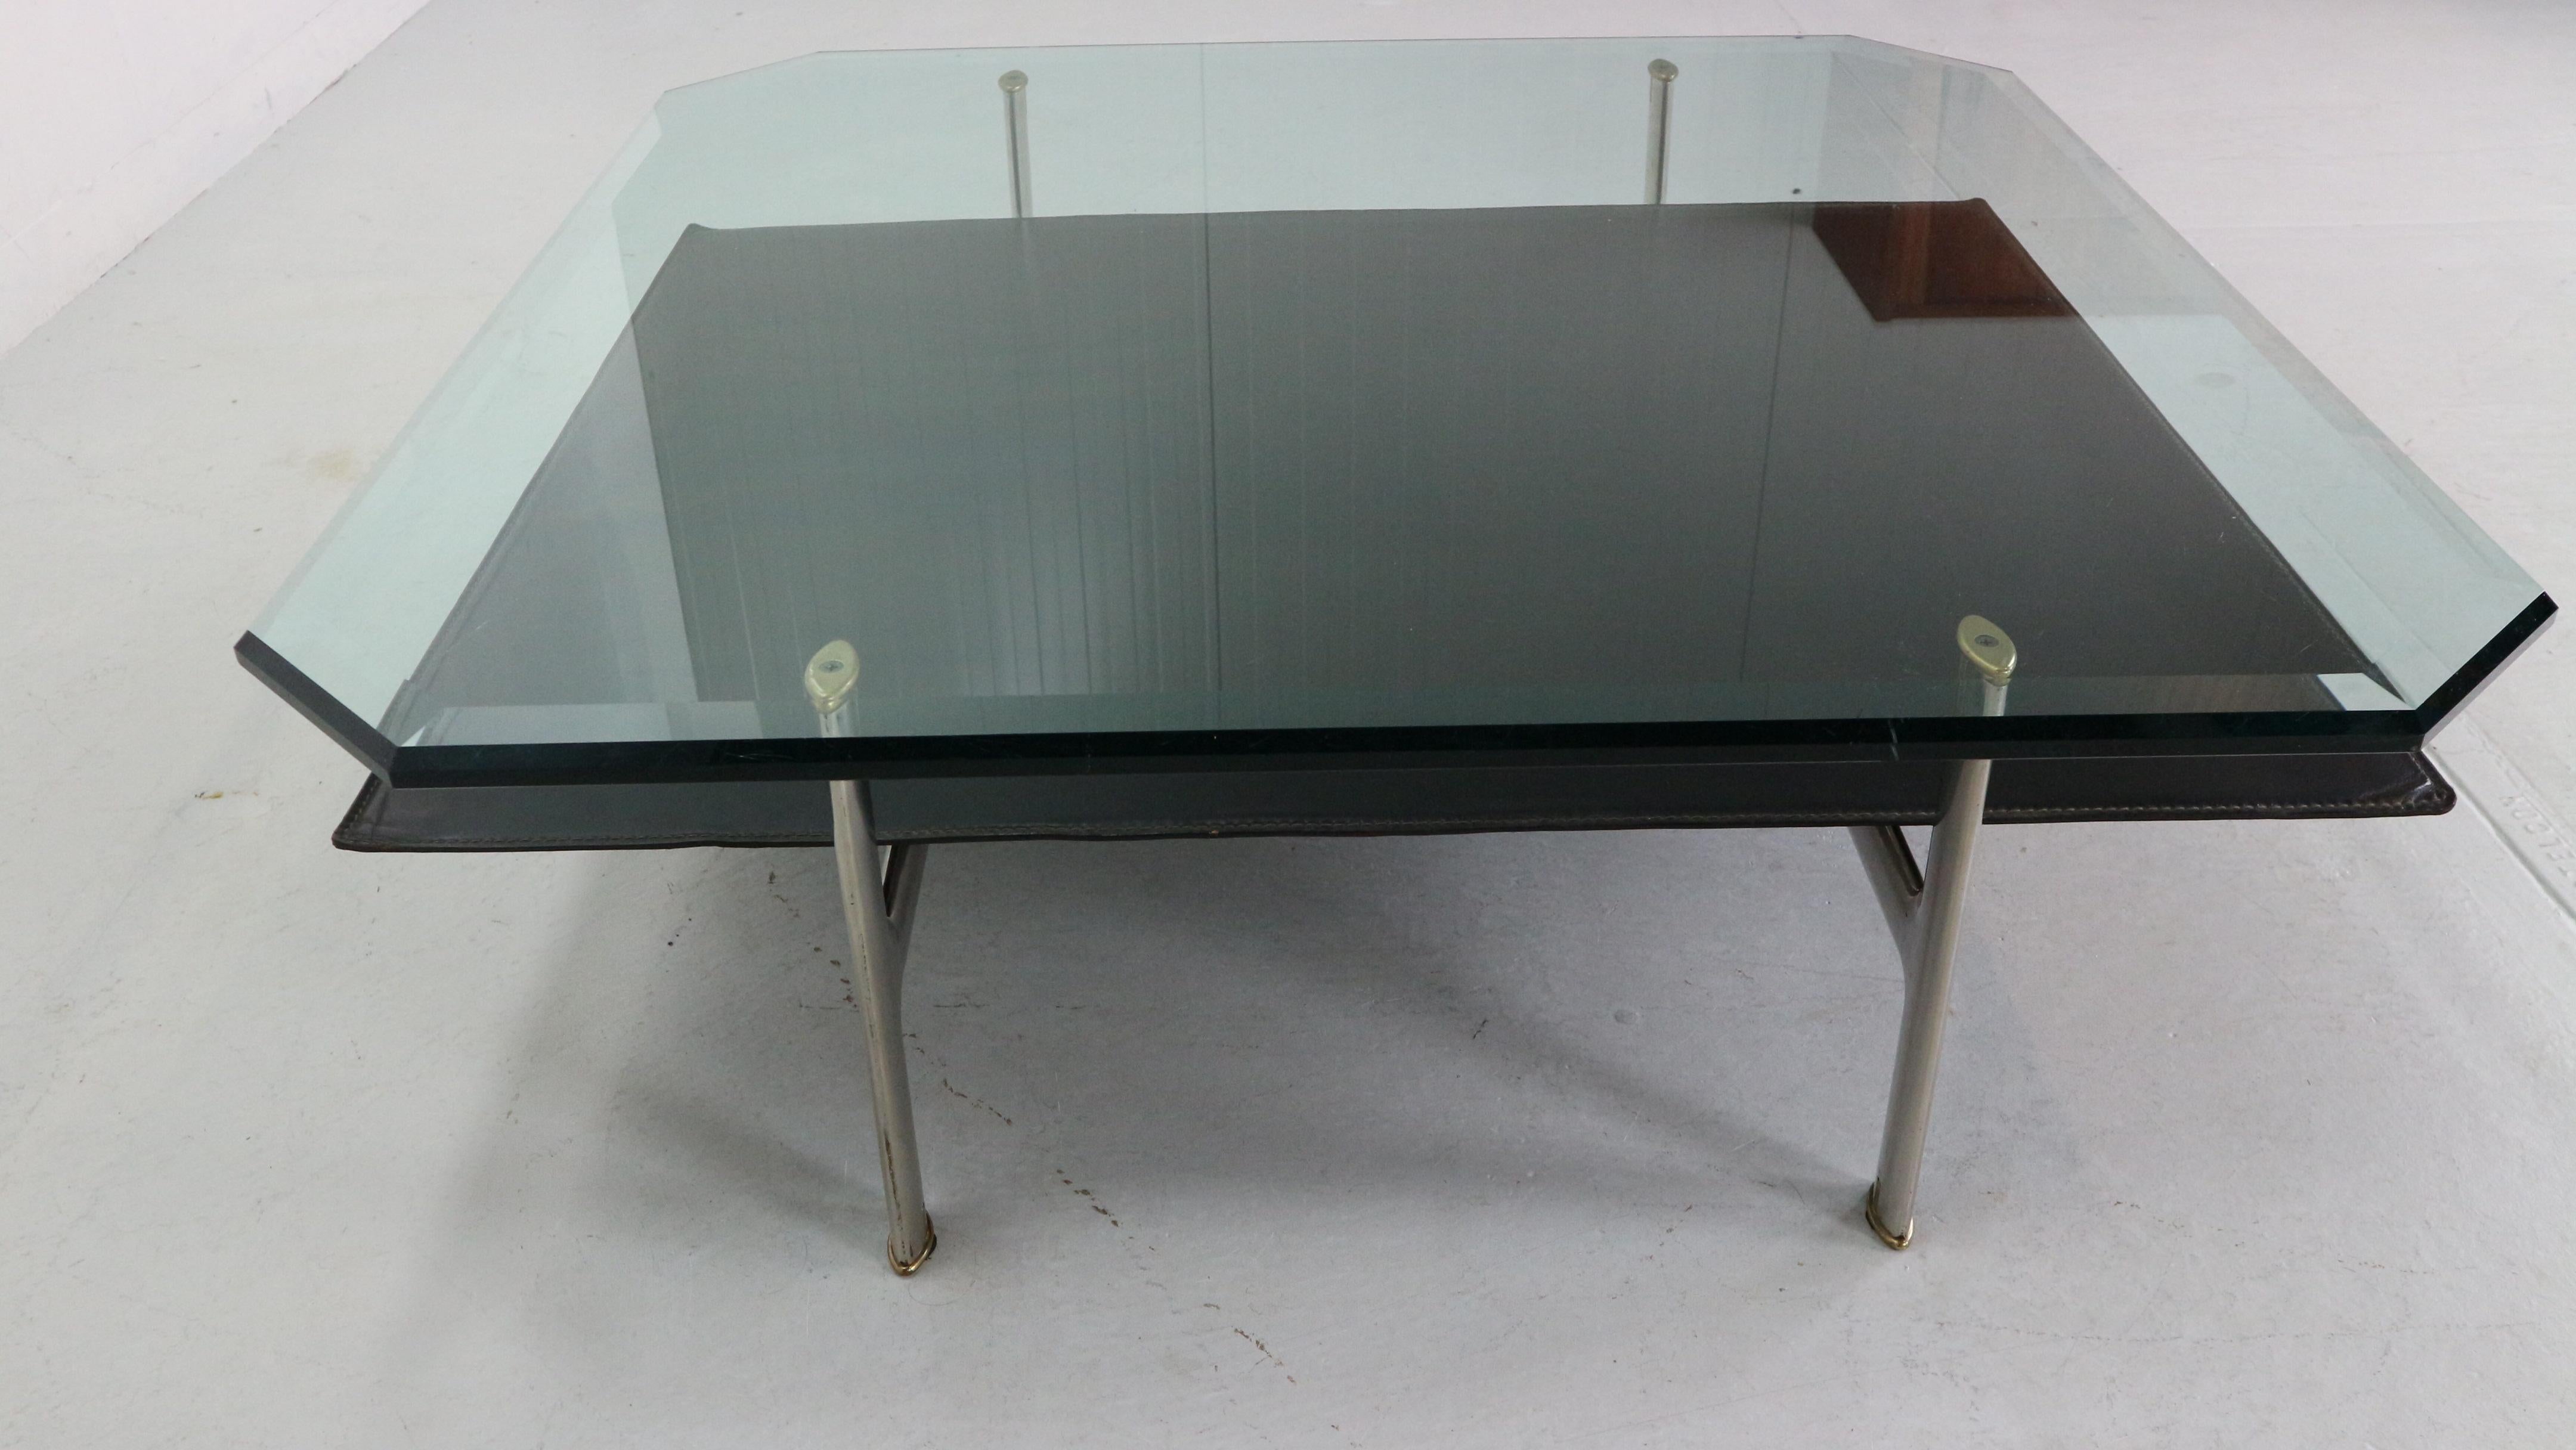 B&B Italia 'Diesis' Two-Tier Glass and Leather Coffee Table by Antonio Citterio  For Sale 3